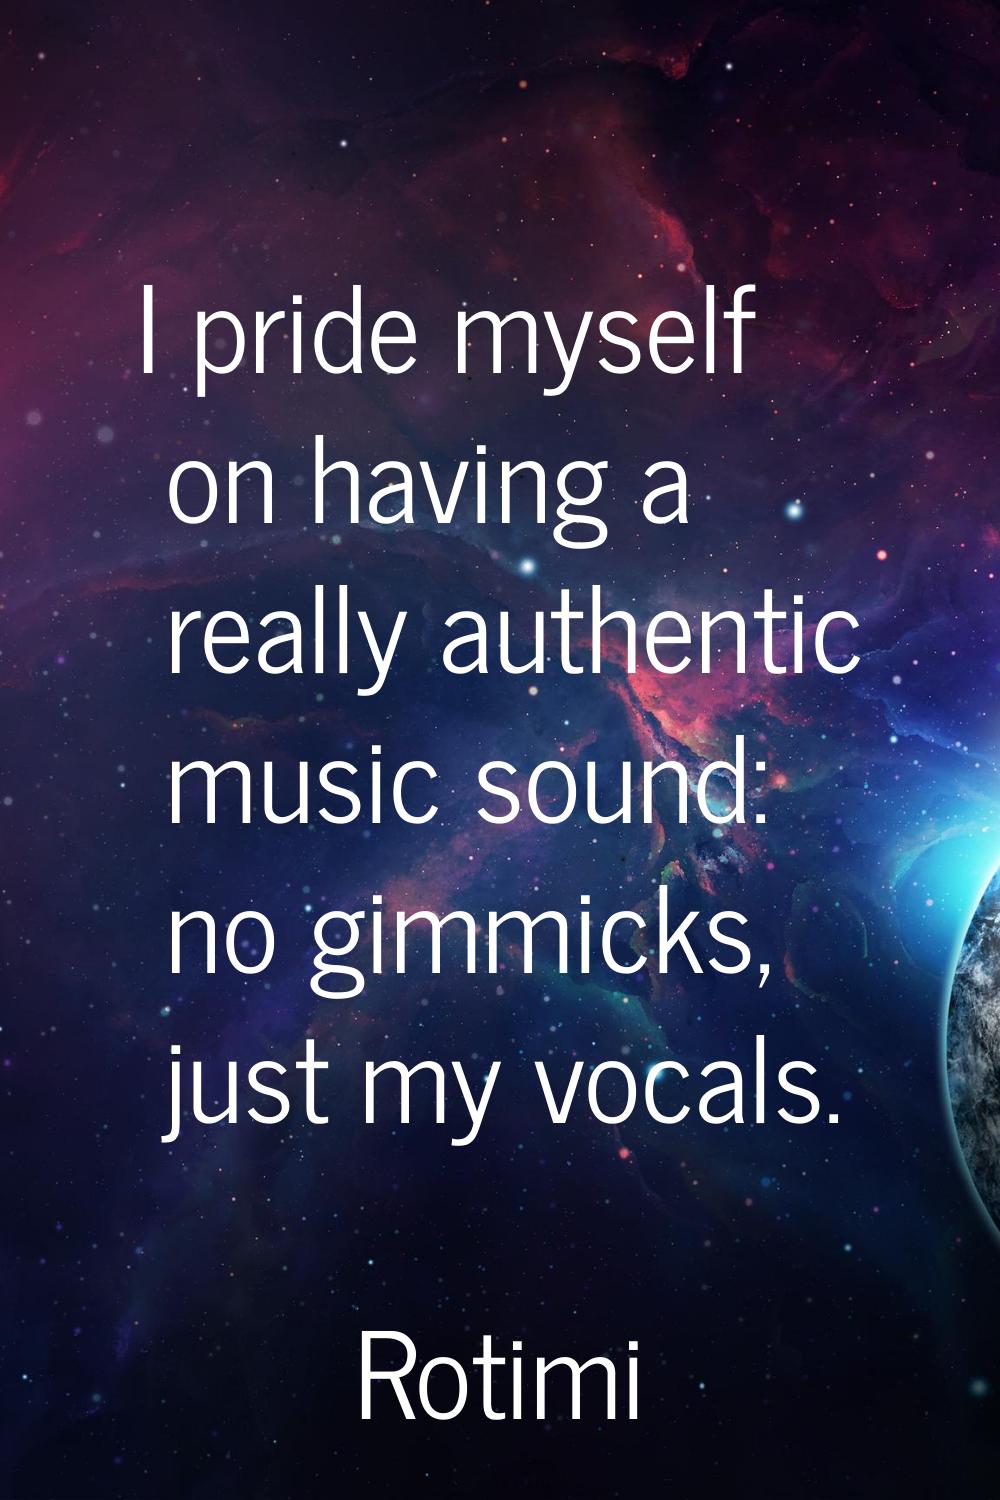 I pride myself on having a really authentic music sound: no gimmicks, just my vocals.